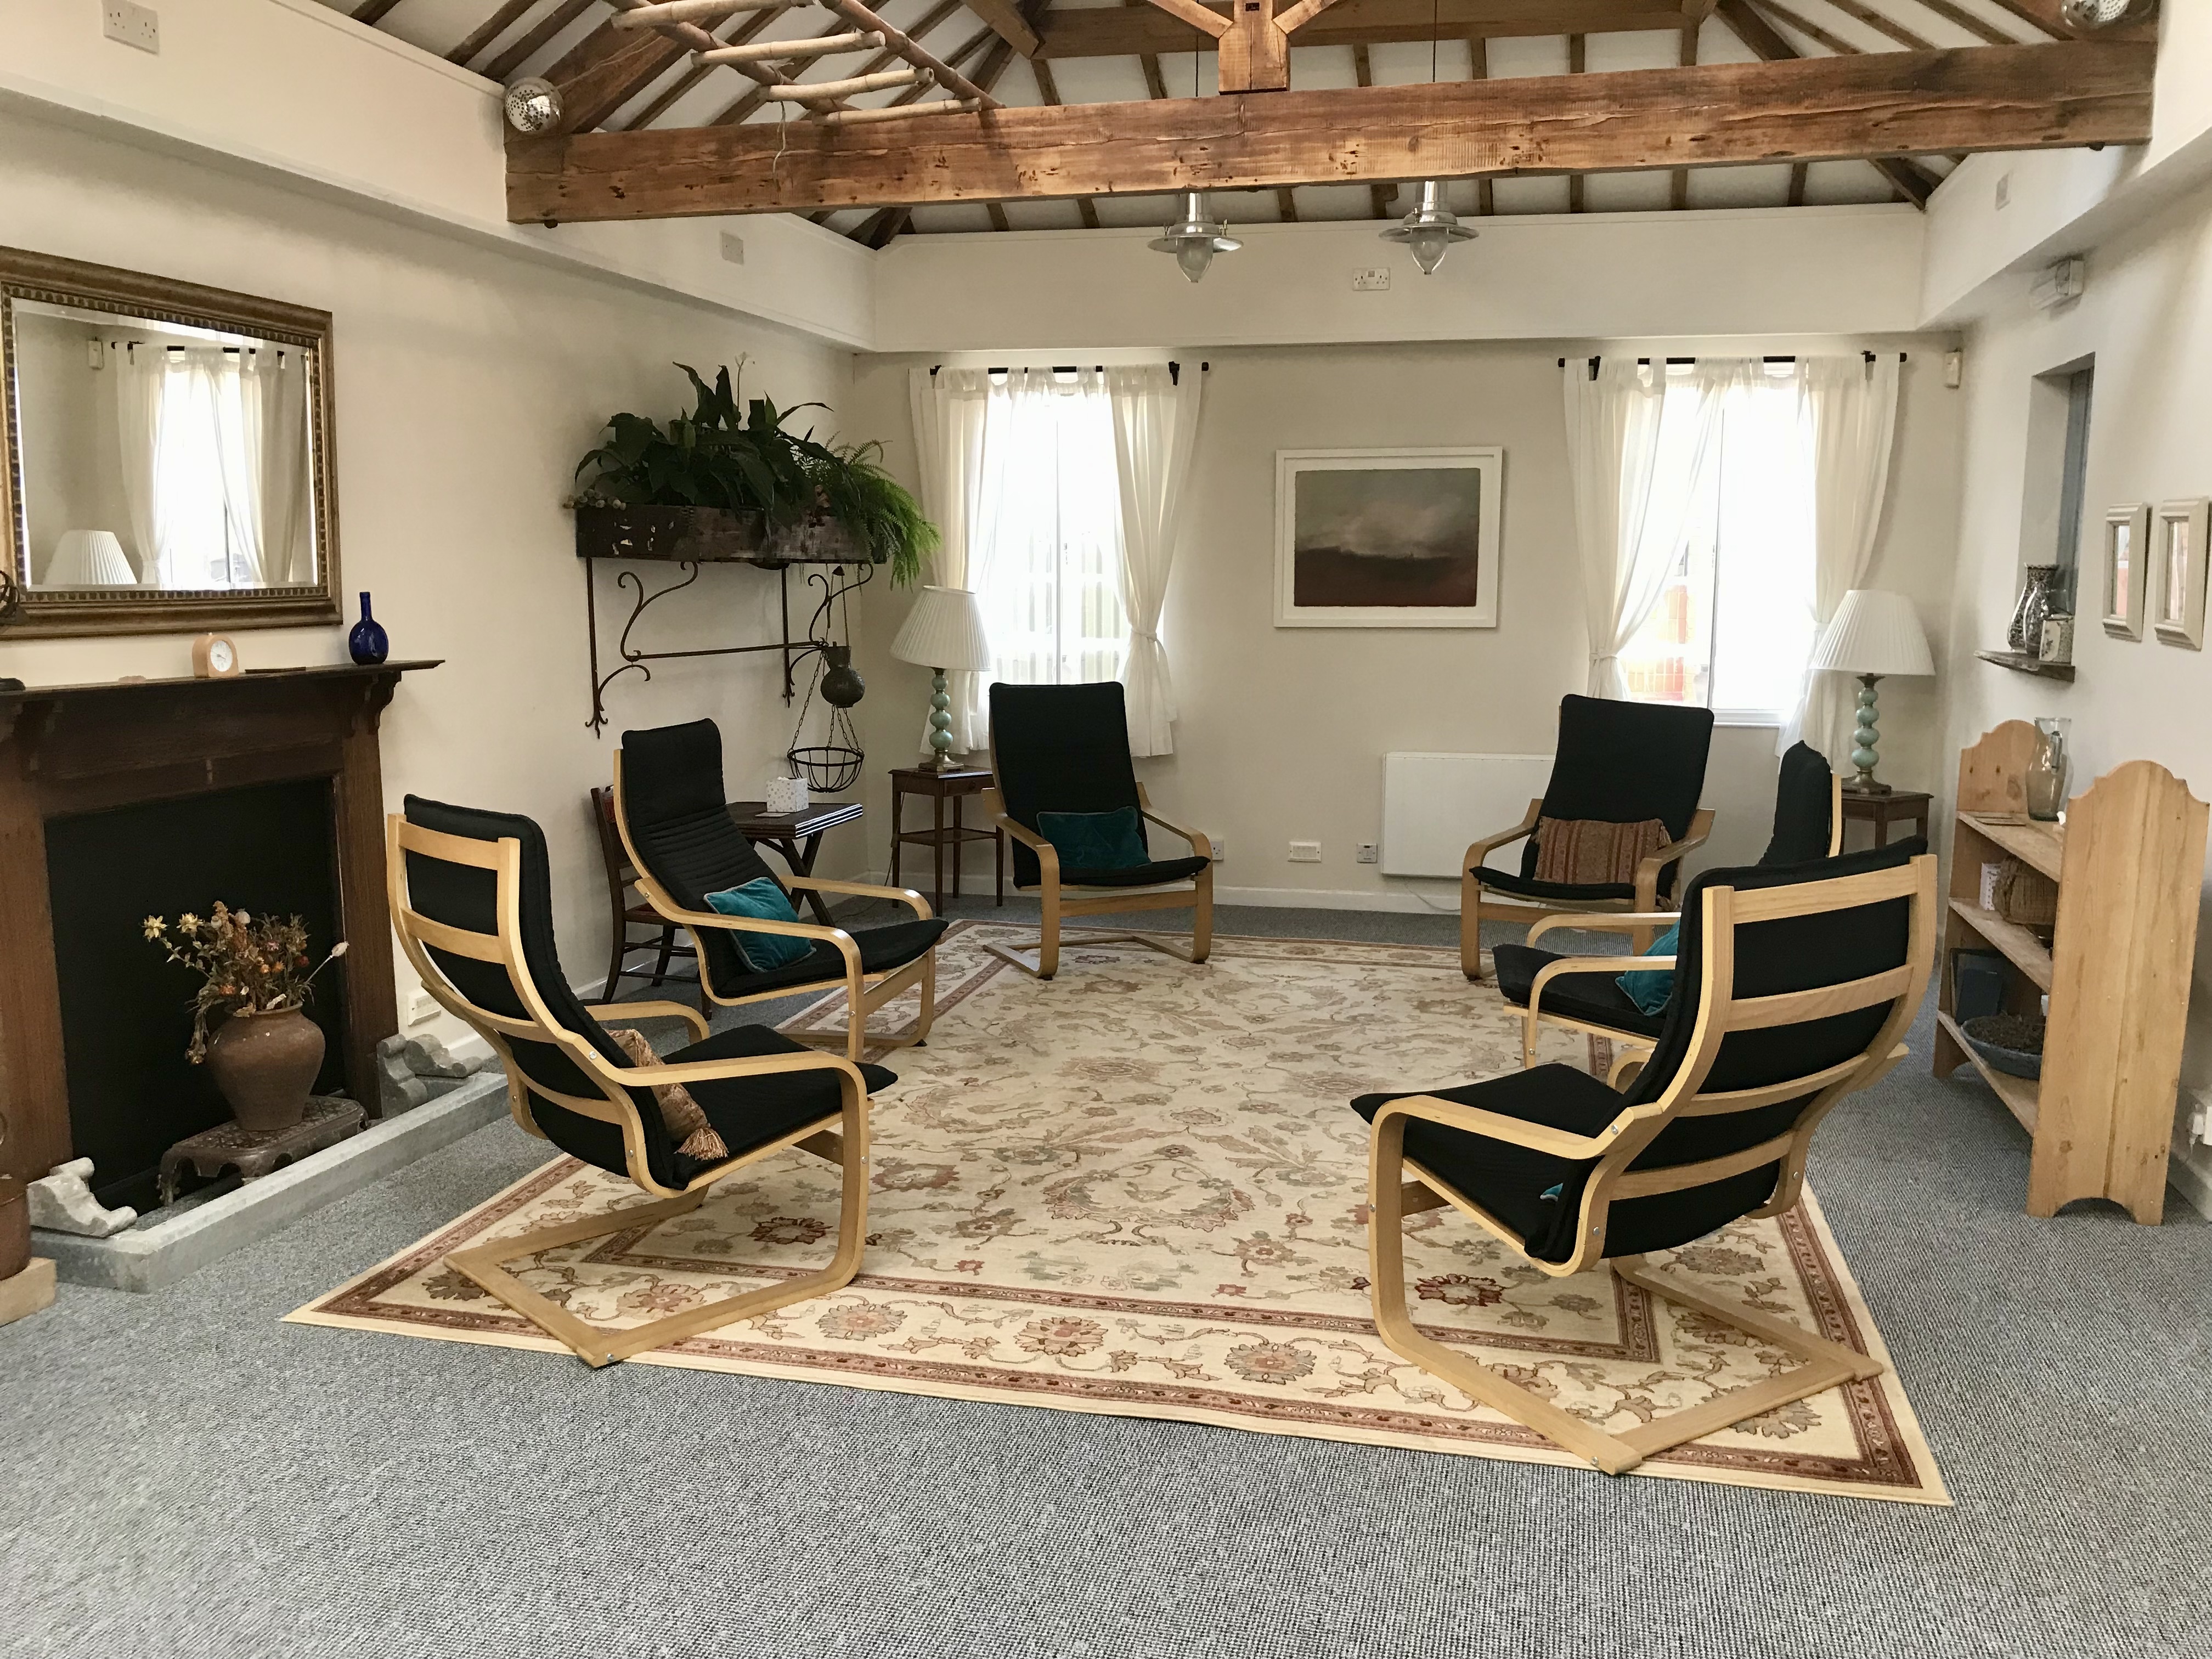 Large therapy room or group room with 6 chairs, fireplace and plants at The Practice Rooms in Stokes Croft, Bristol